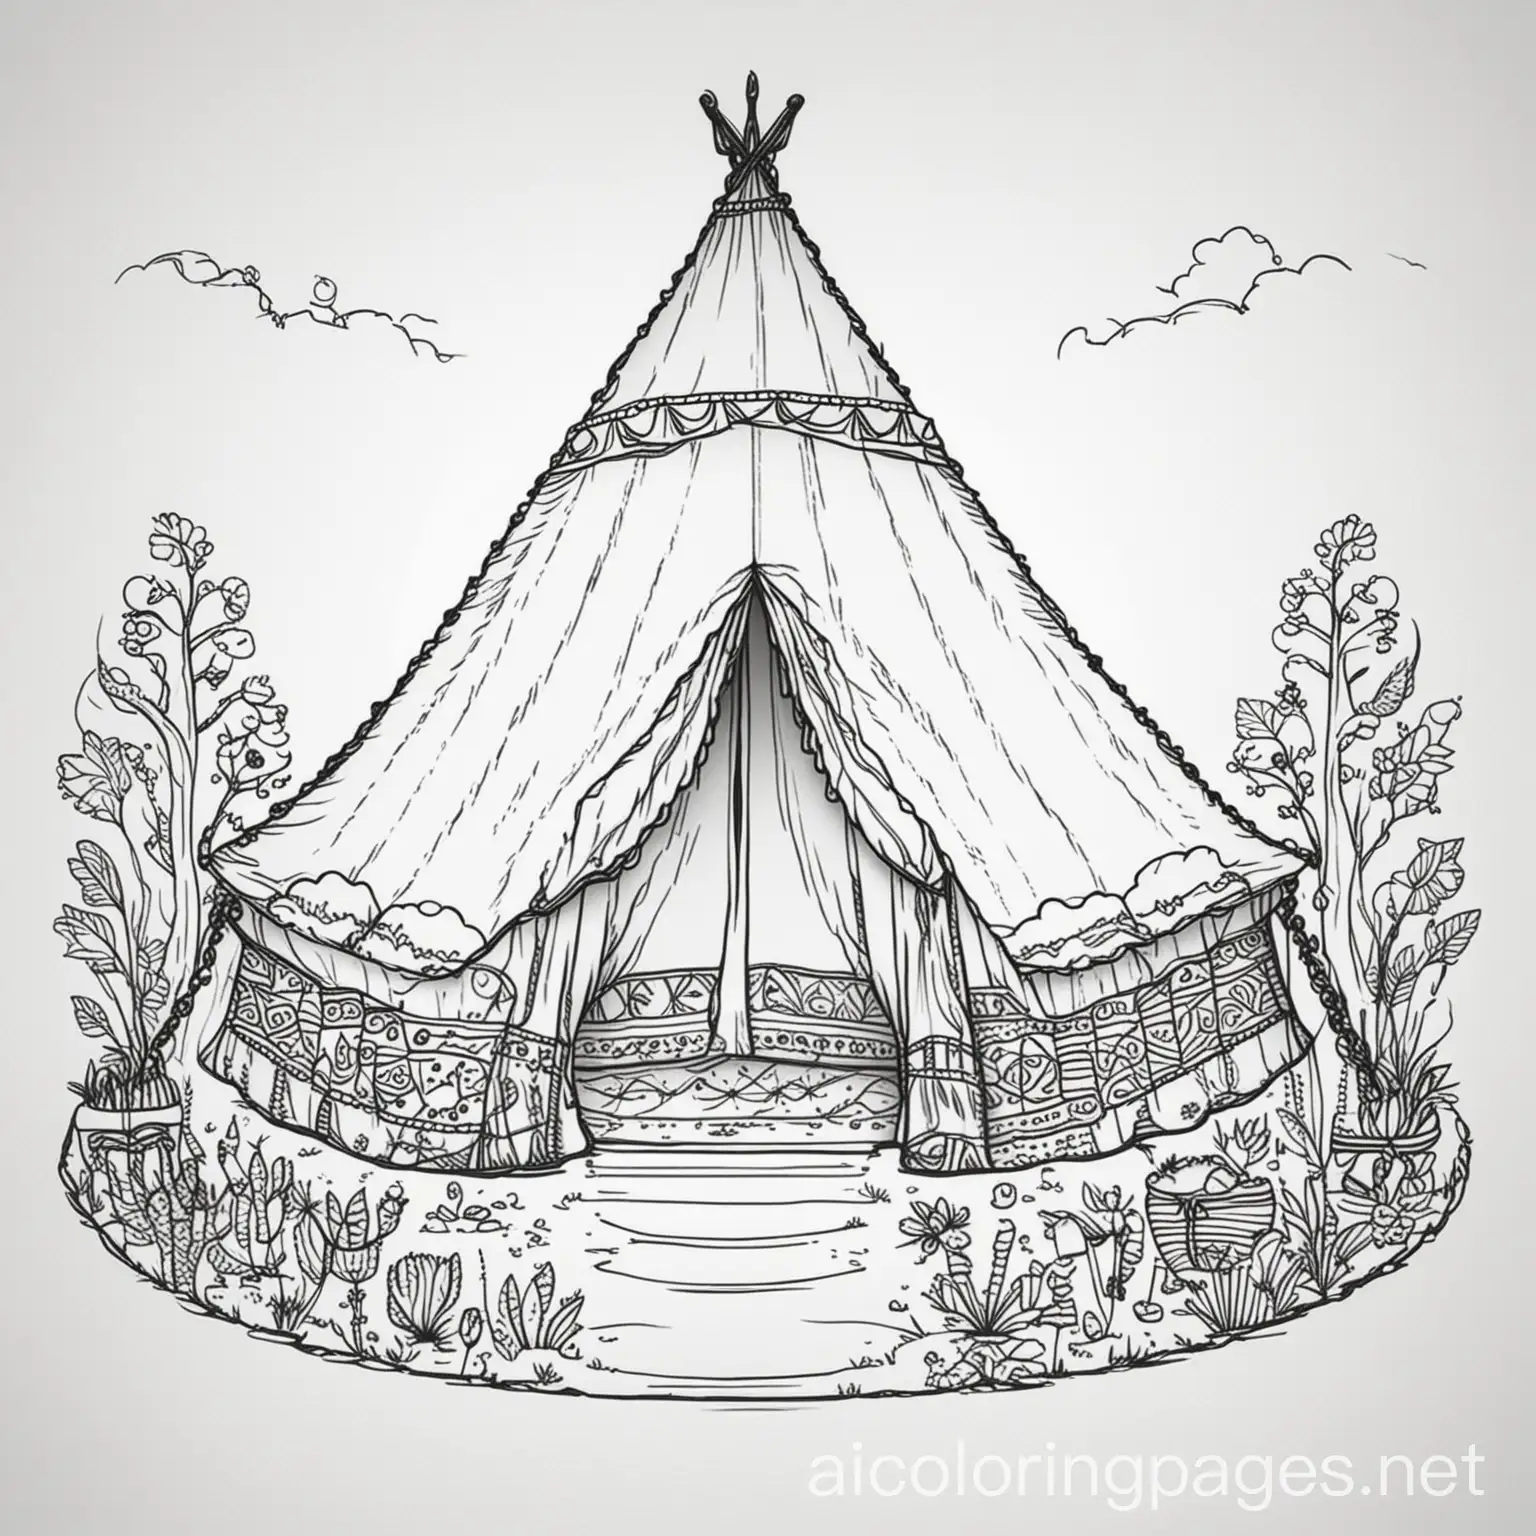 a Cute tent at a festival for adults , Coloring Page, black and white, line art, white background, Simplicity, Ample White Space. The background of the coloring page is plain white. The outlines of all the subjects are easy to distinguish, making it simple to color without too much difficulty, lots of patterns, boho style, Coloring Page, black and white, line art, white background, Simplicity, Ample White Space. The background of the coloring page is plain white to make it easy for young children to color within the lines. The outlines of all the subjects are easy to distinguish, making it simple for kids to color without too much difficulty